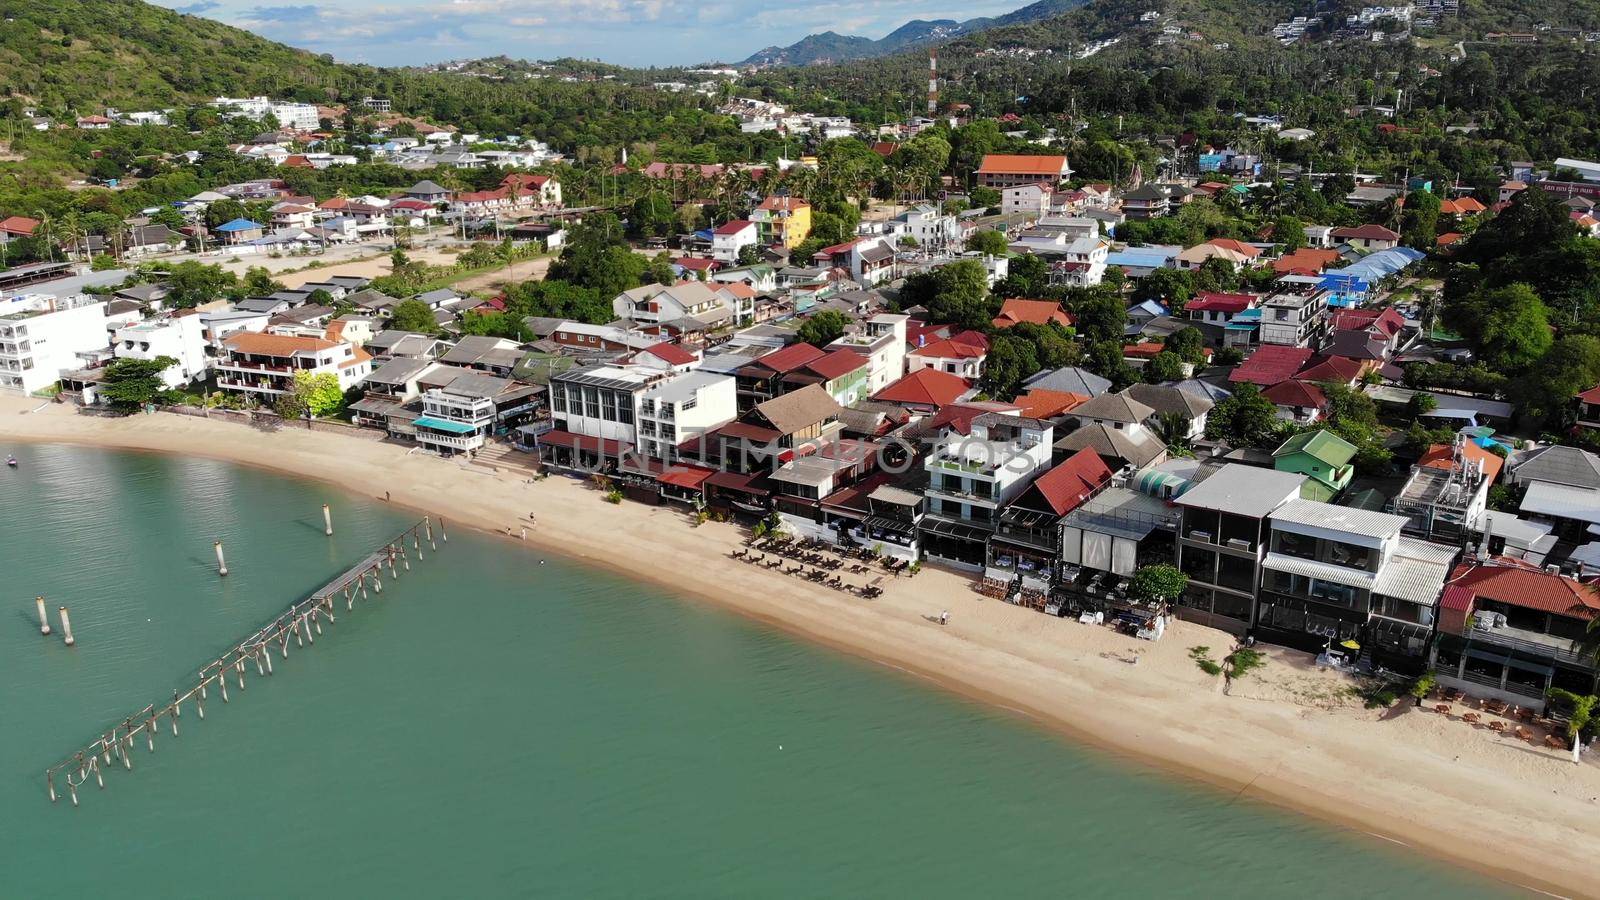 Fisherman village on seashore. Aerial view of typical touristic place on Ko Samui island with souvenir shops and walking street on sunny day. Architecture in asia, local settlement drone view.